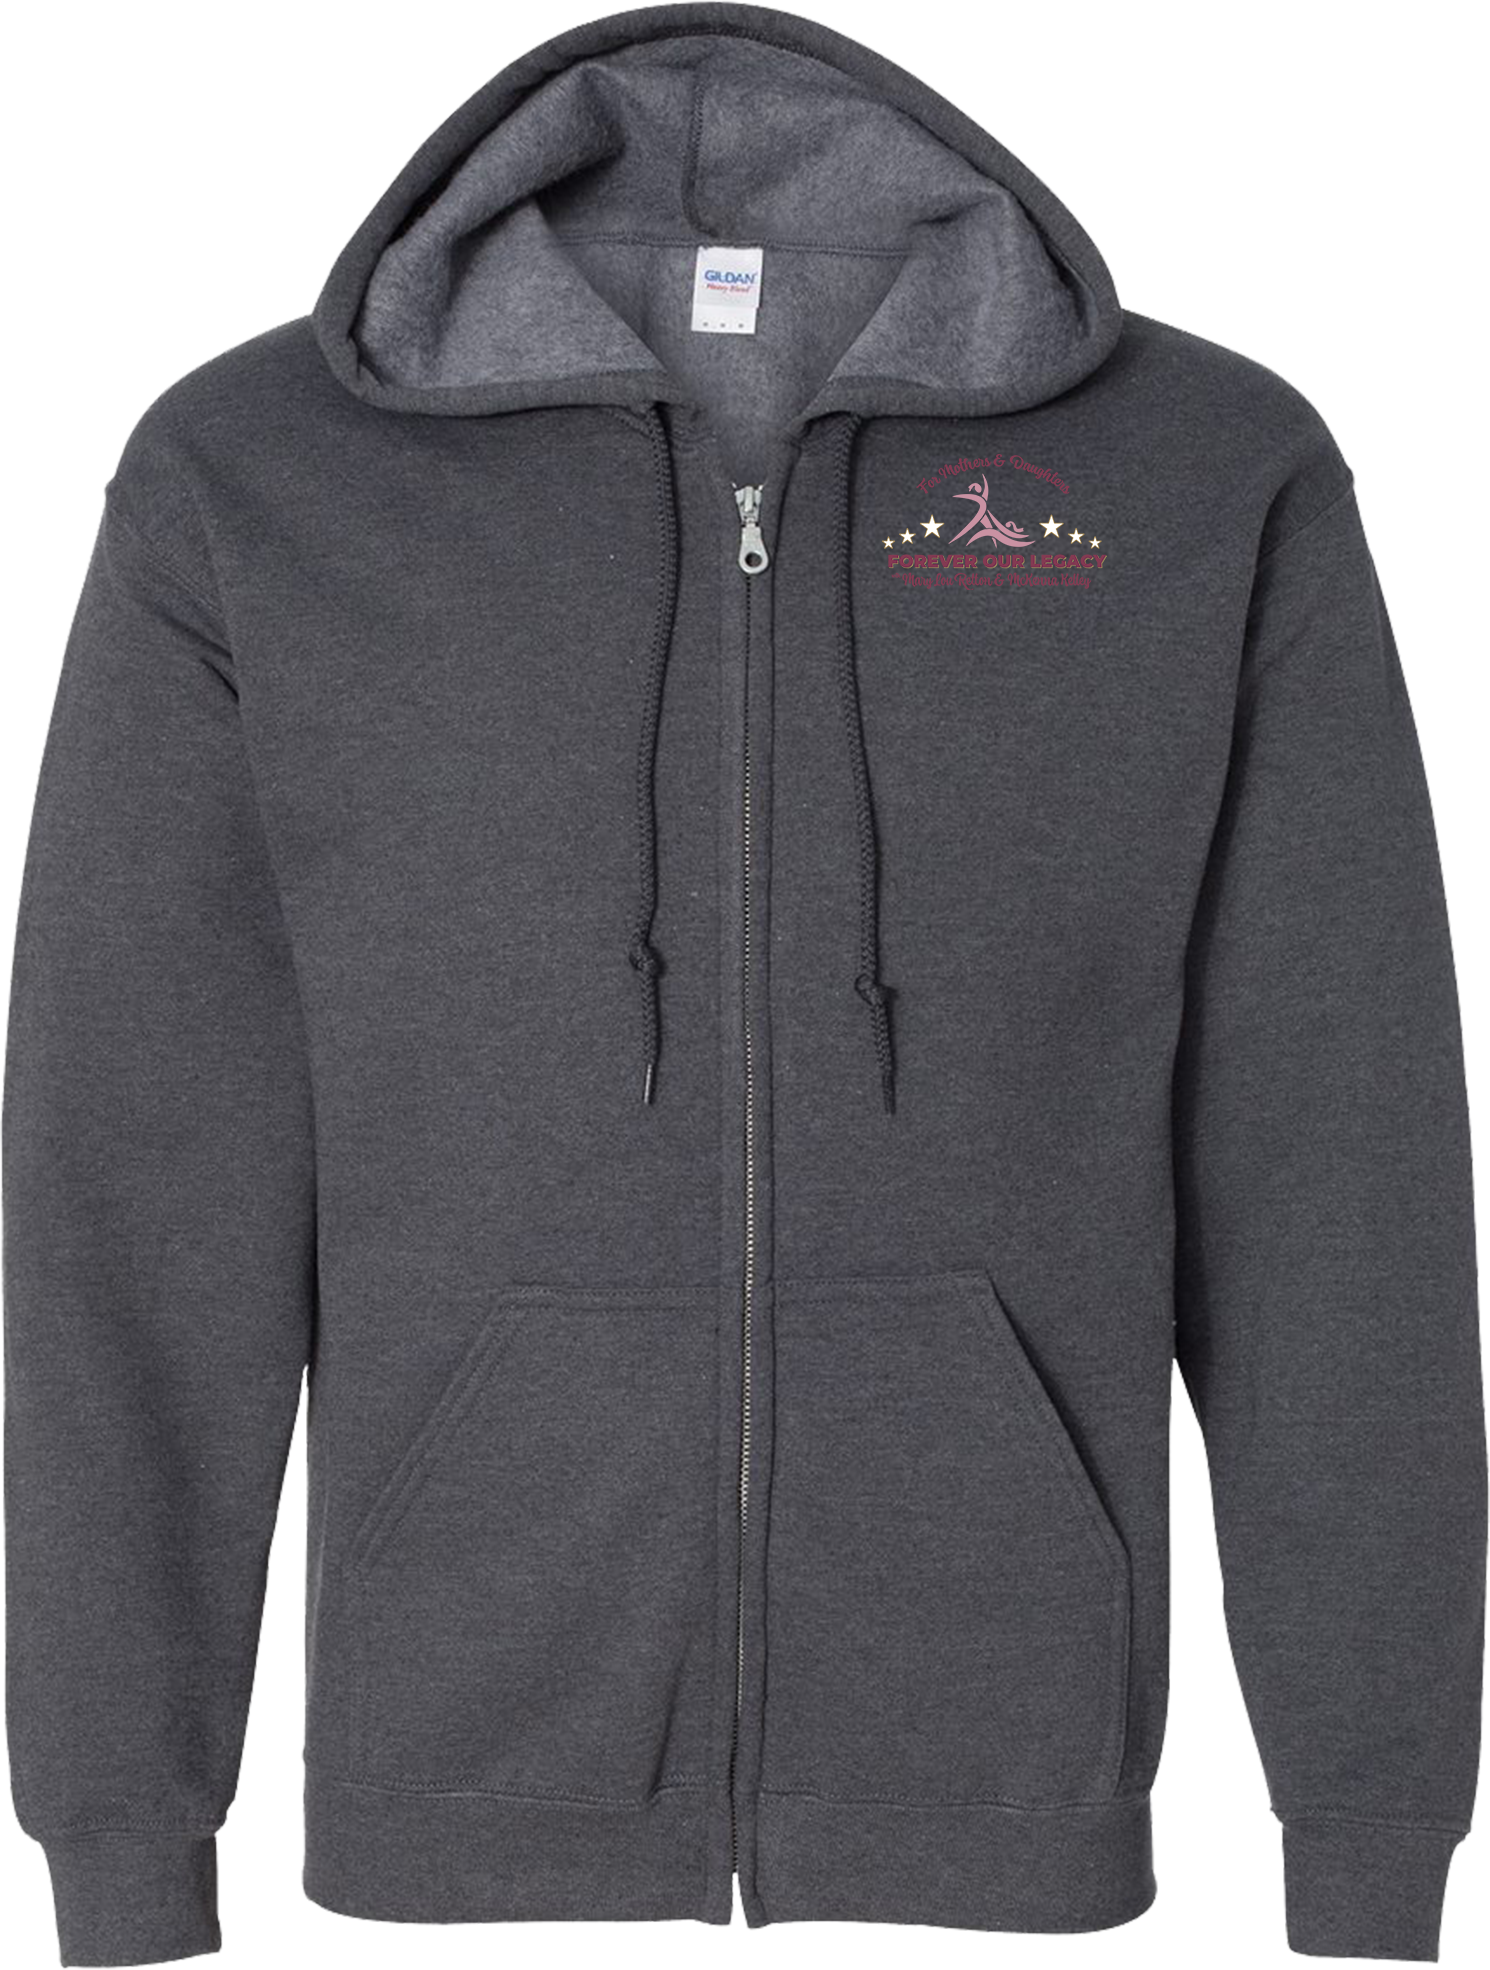 Full Zip Hoodies - 2024 For Mothers & Daughters Forever Our Legacy Mary Lou Retton